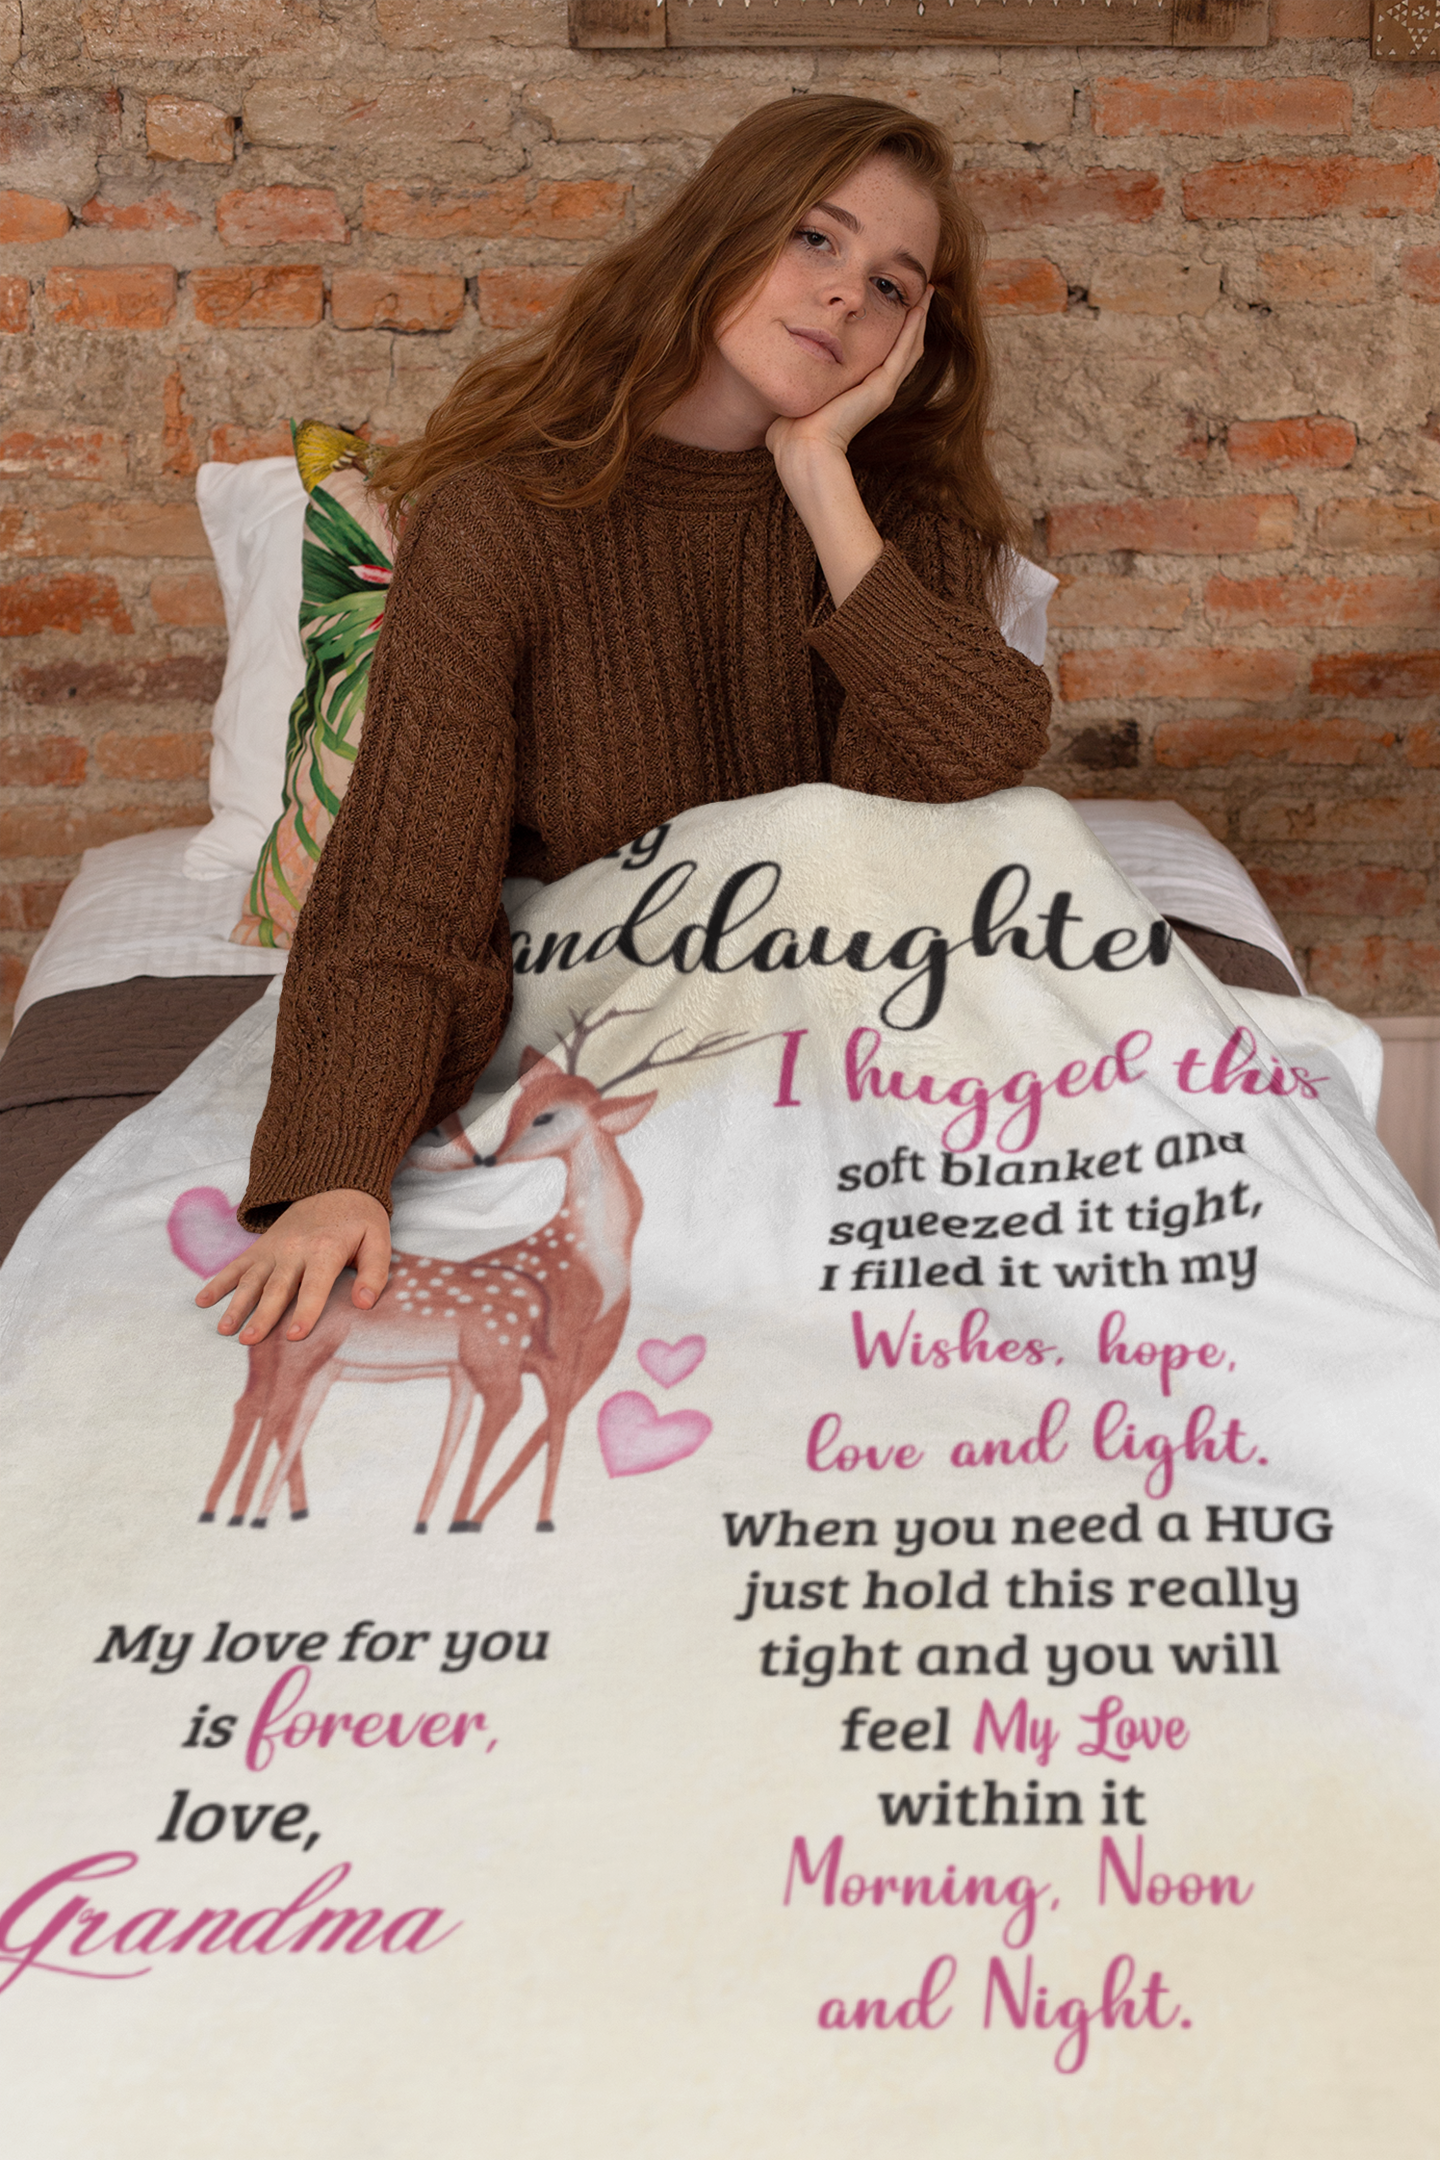 To My Granddaughter | Cute Dear Throw Blanket